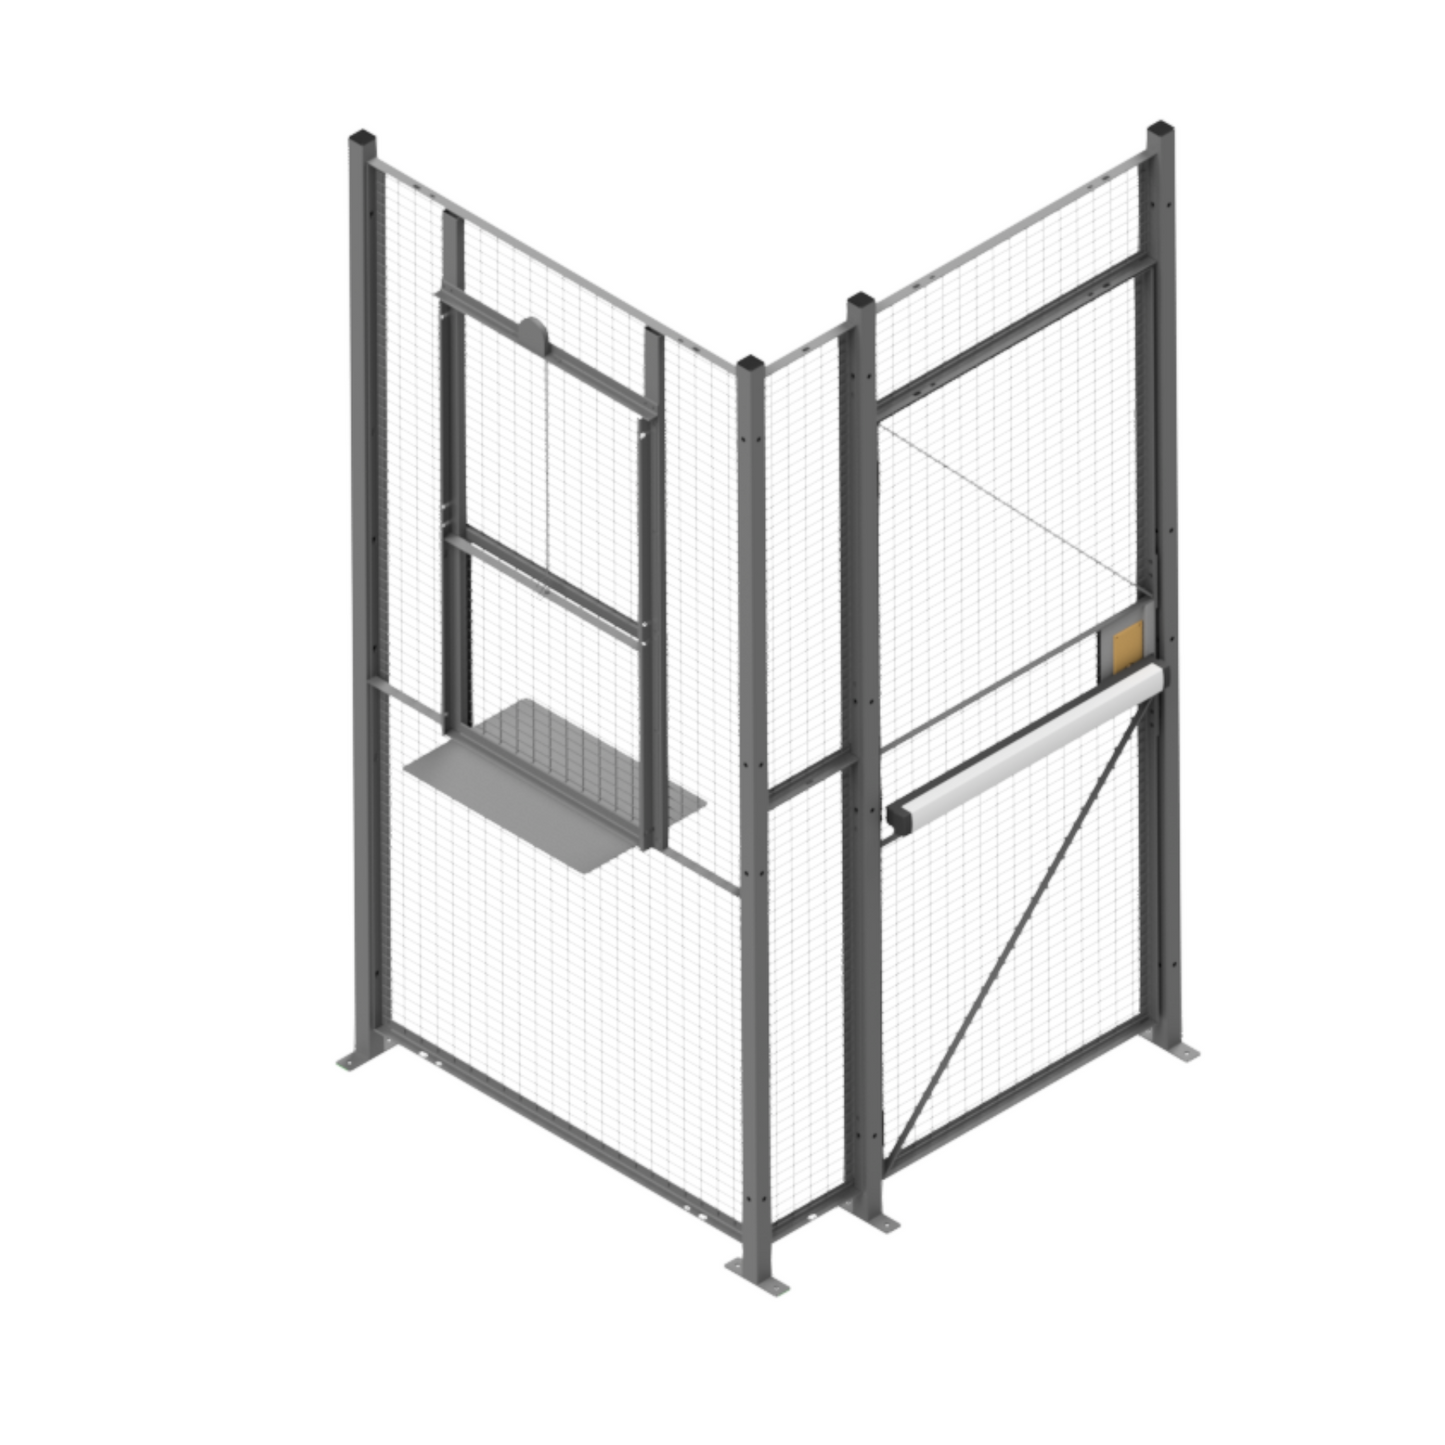 2 Sided Driver Cages (w/Push Bar & Service Window)